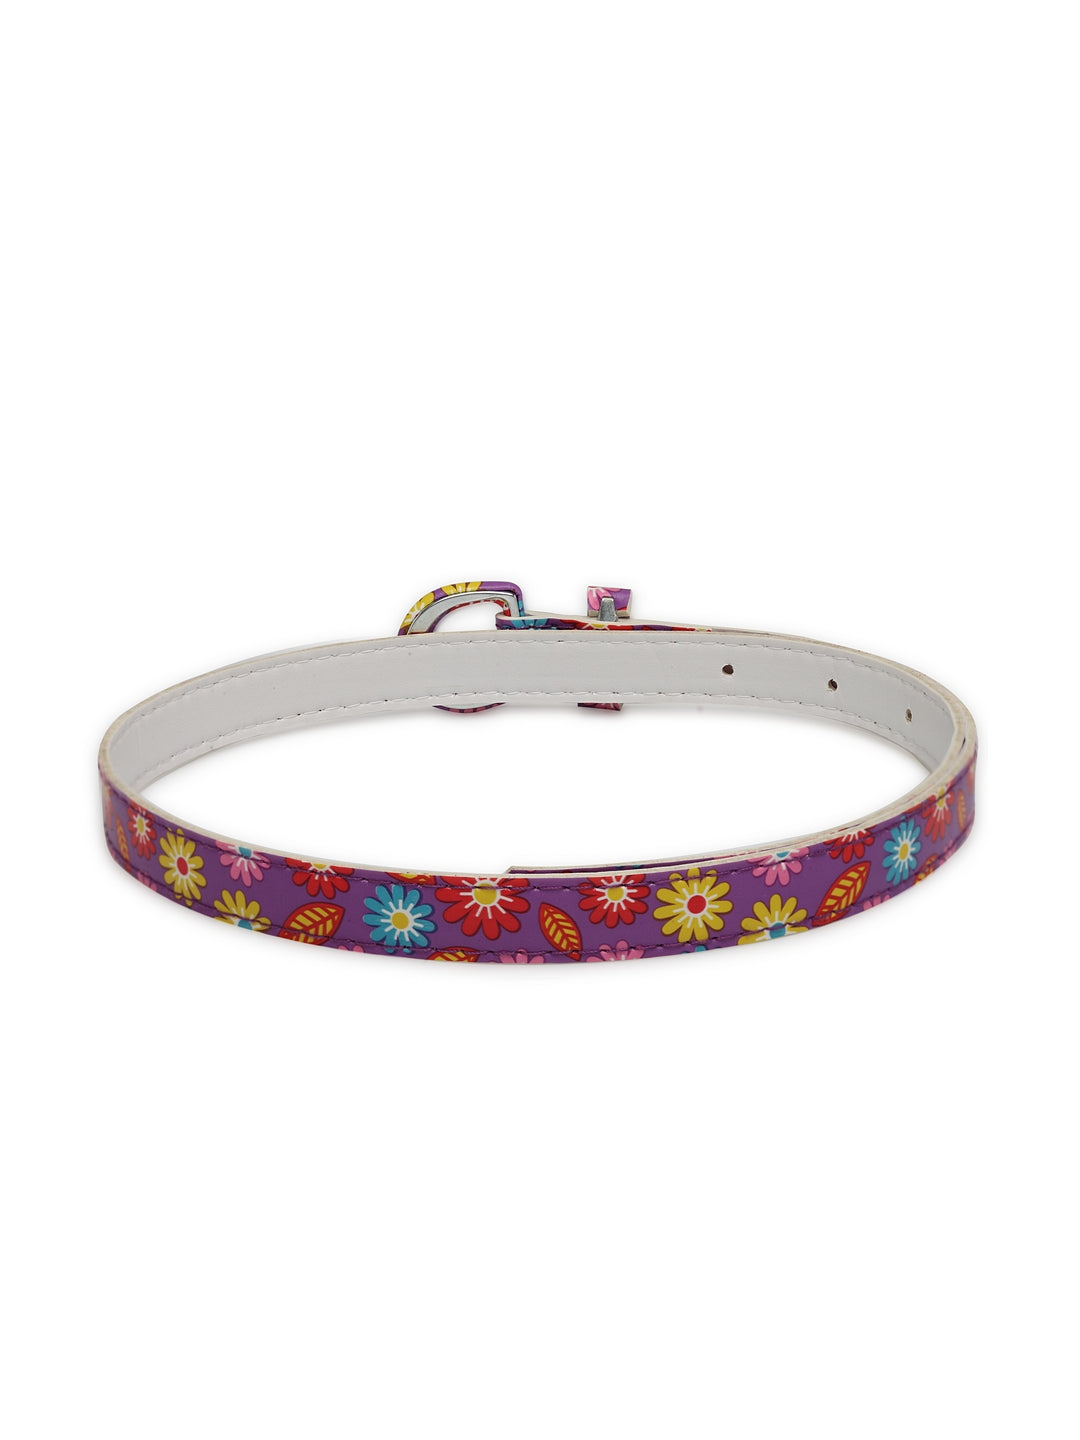 Stol'n Kids Floral Girls Belt with a Printed pin buckle (Formal/Casual) for Jeans/Shorts/Skirts (Suitable for 3 to 4 Years Old) (Size: 80 x 1.5 Cm) (Purple)